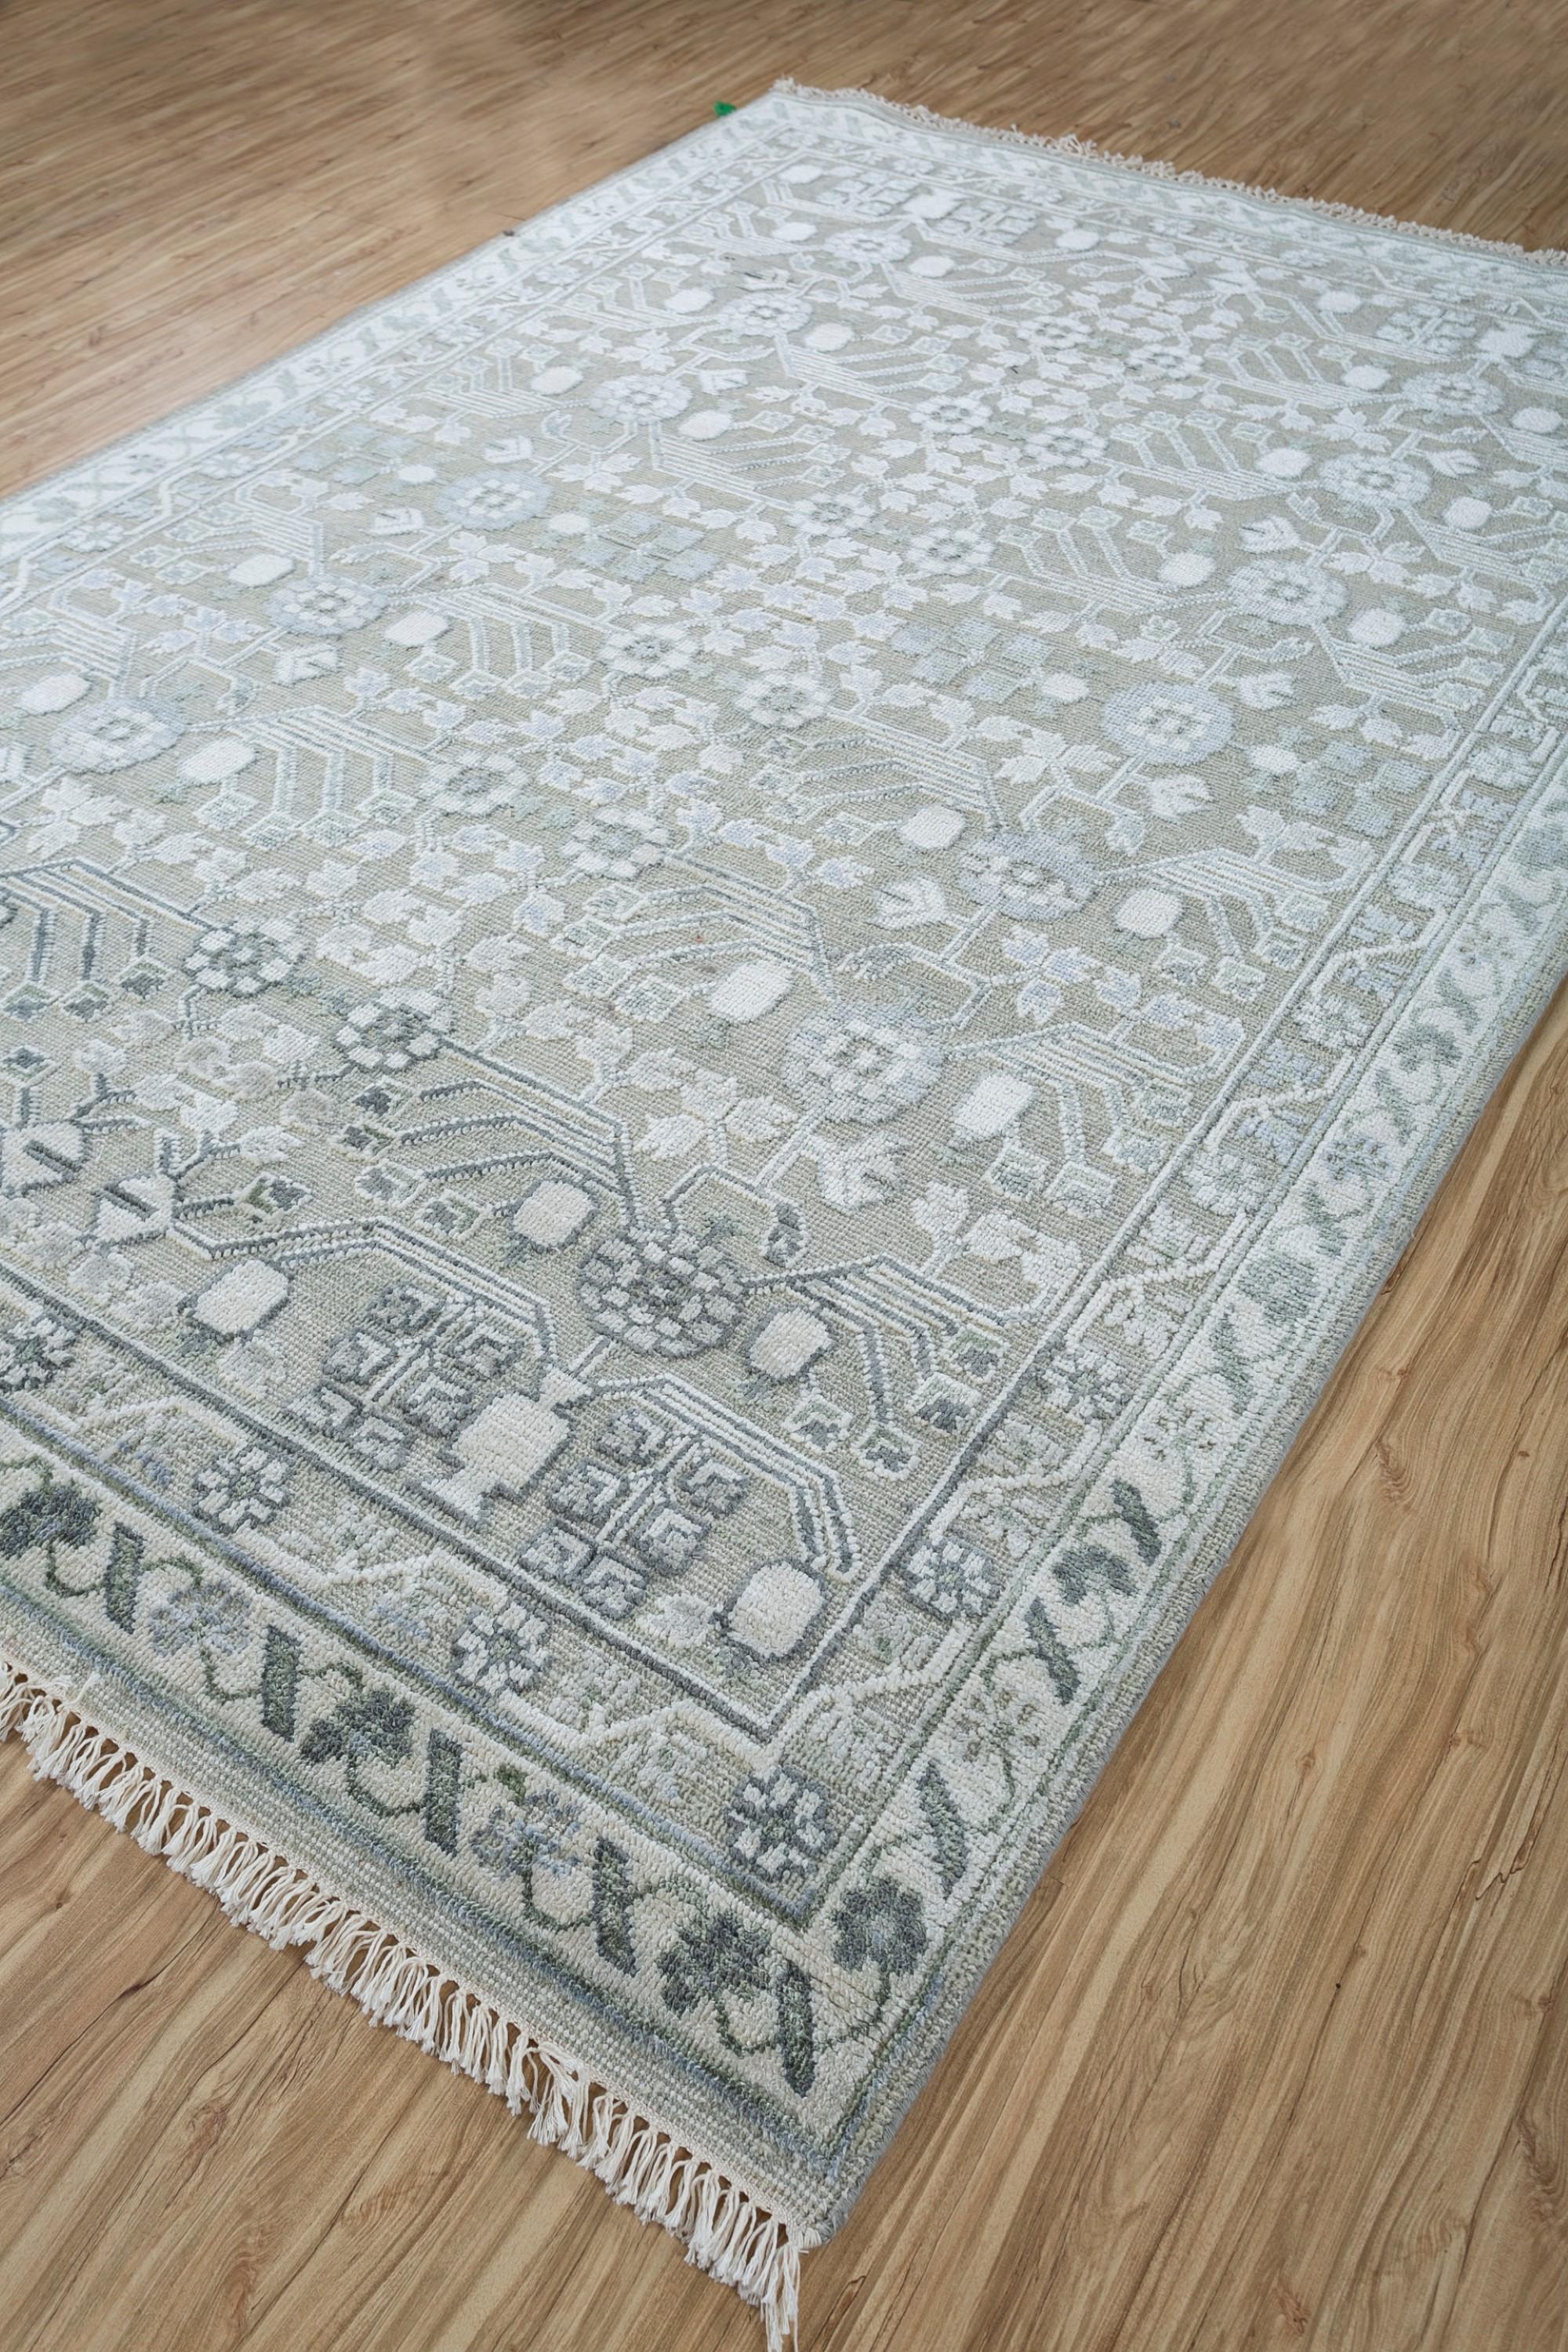 Tibetan Tranquil Sky Mosaic Blue Haze Undyed White 180X270 cm Hand-Knotted Rug For Sale